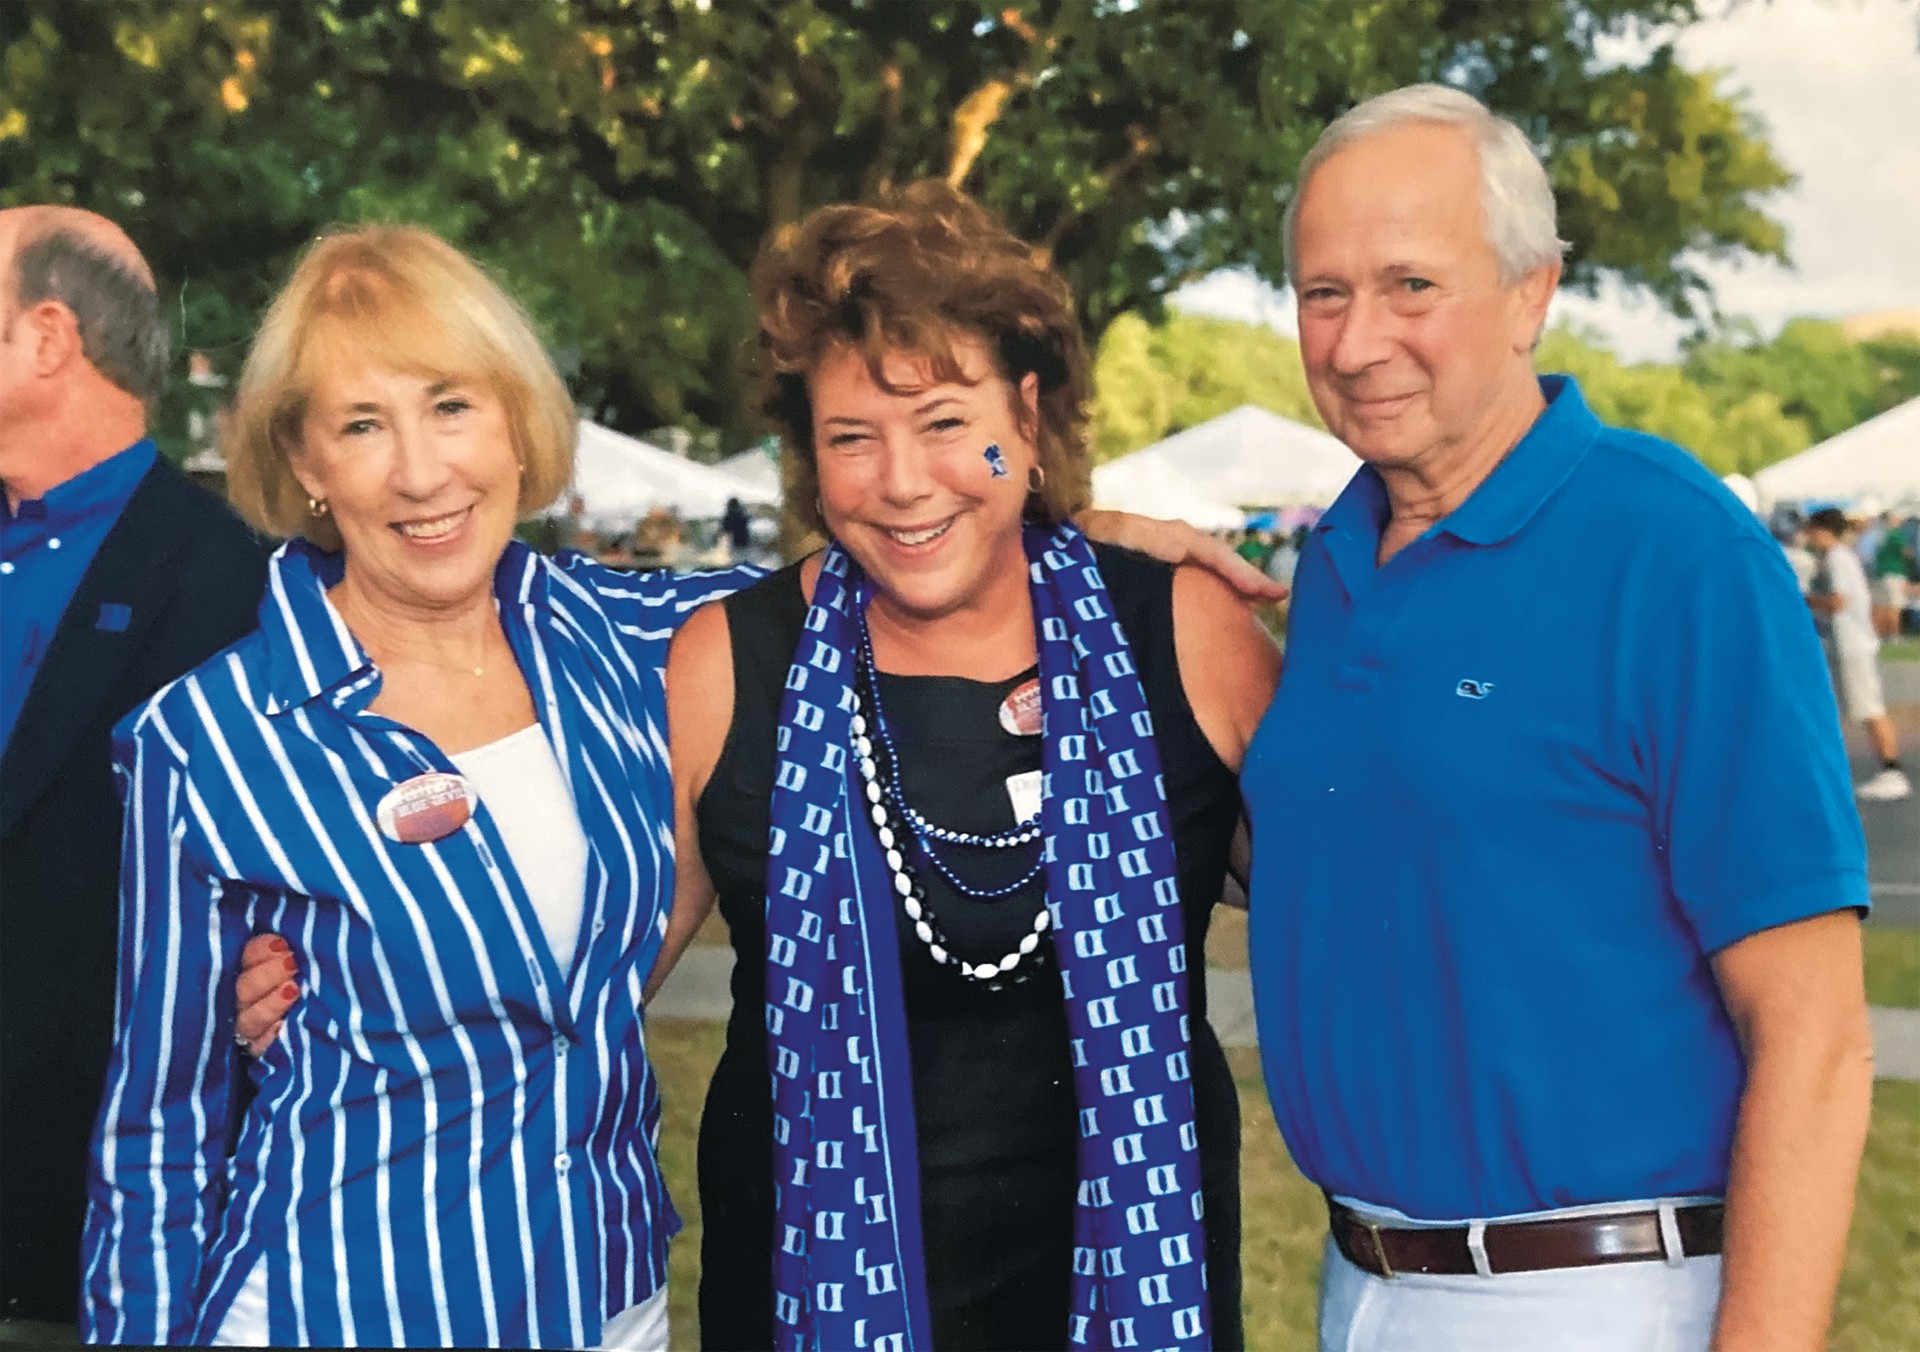 Sterly Wilder with former Duke President Richard Brodhead and his wife, Cynthia